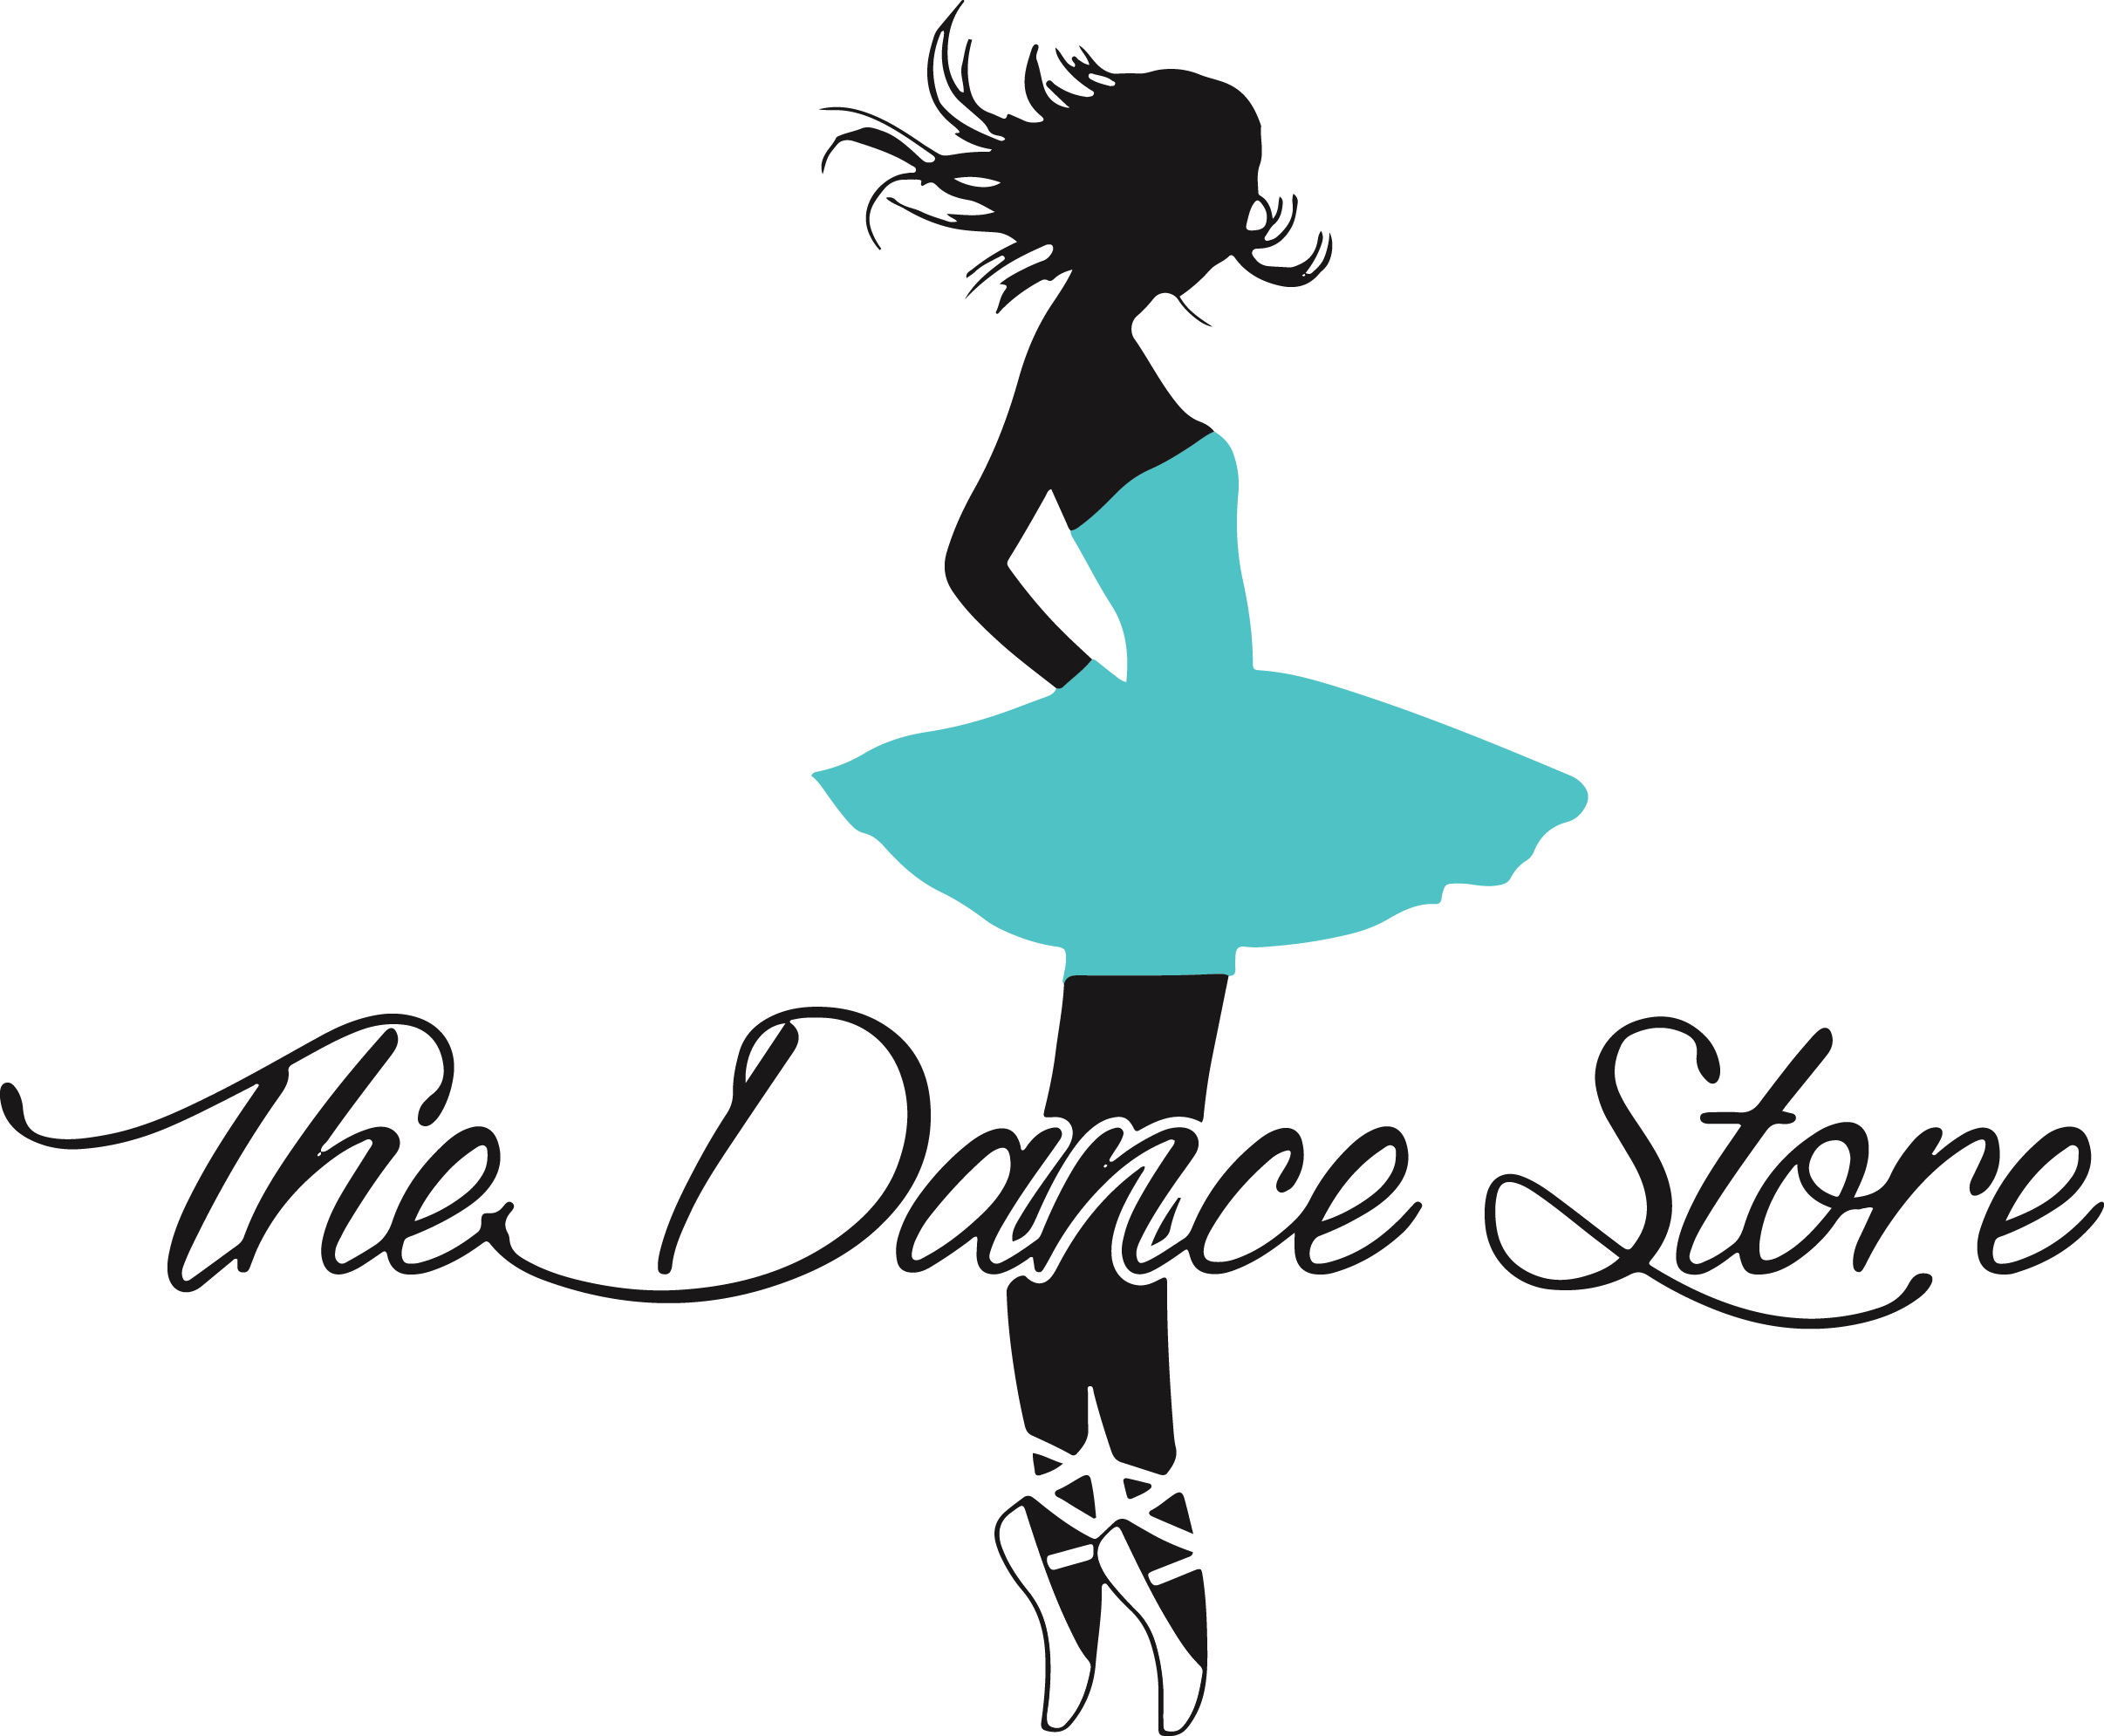 The Dance Store Tennessee – The Dance Store -Tennessee